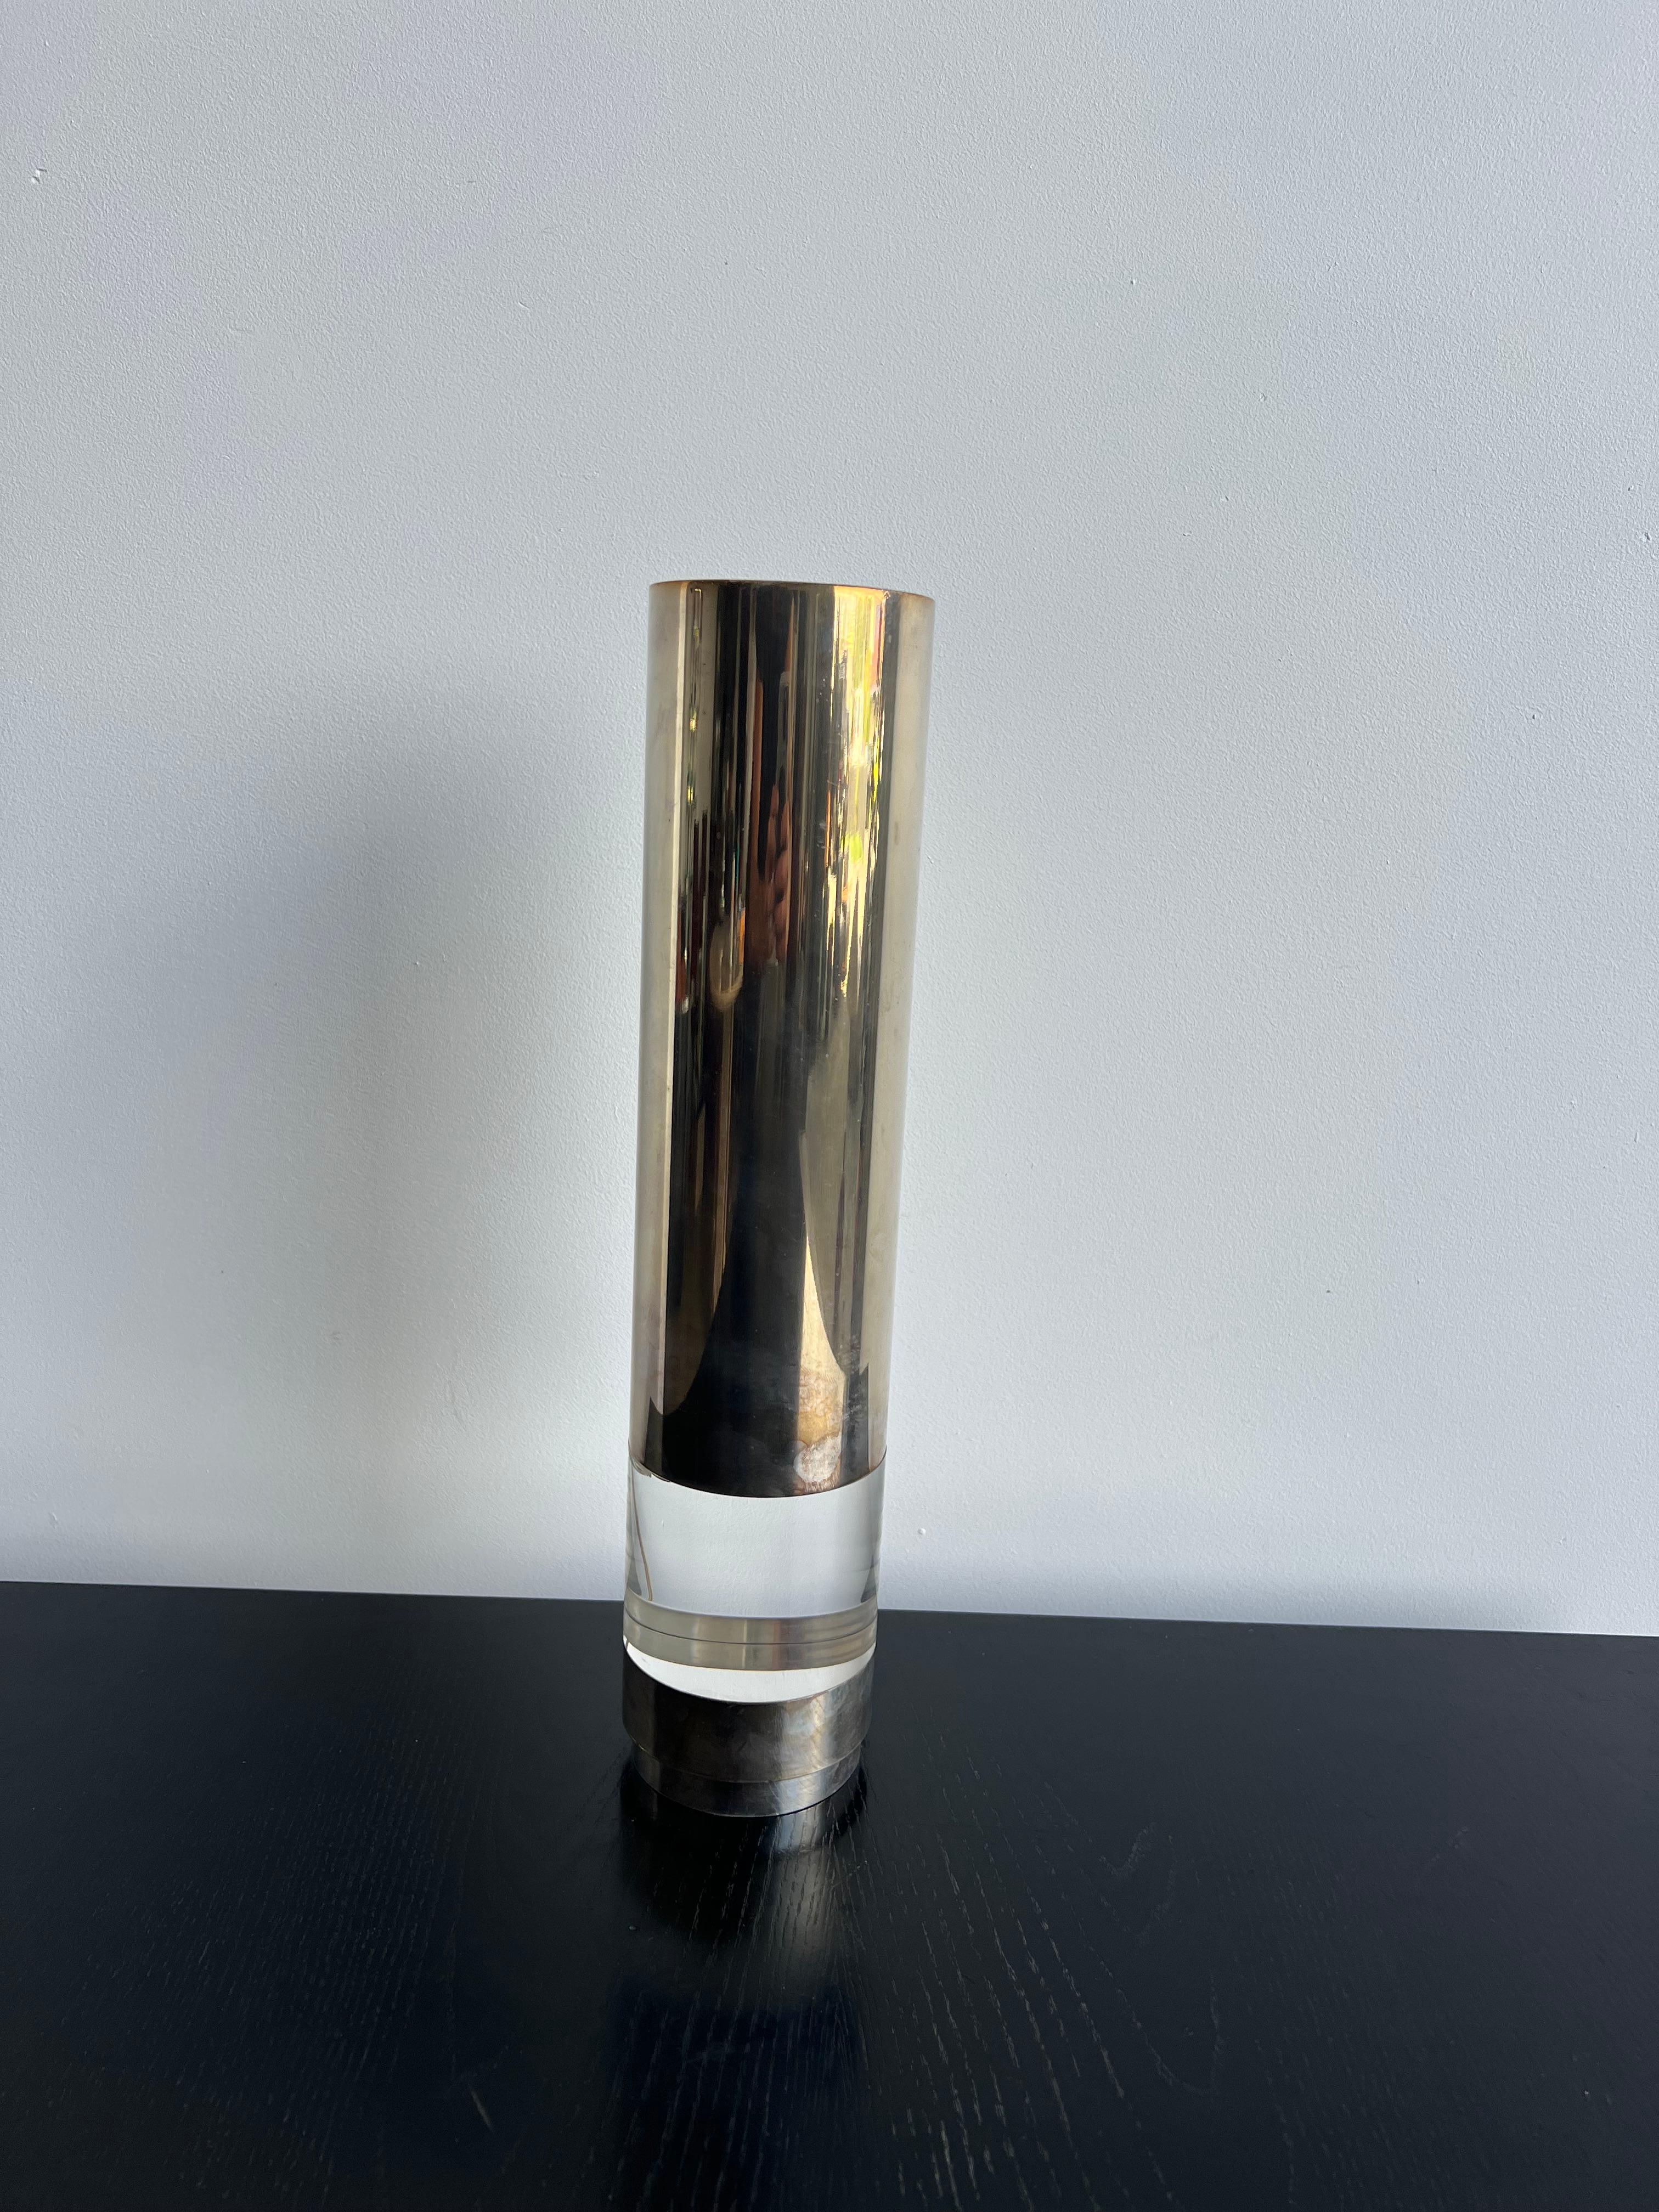 Lino Sabattini Silver Plated Table Lamp by Christofle, France 1960s.
Silver plated tube with Perspex middle section.
